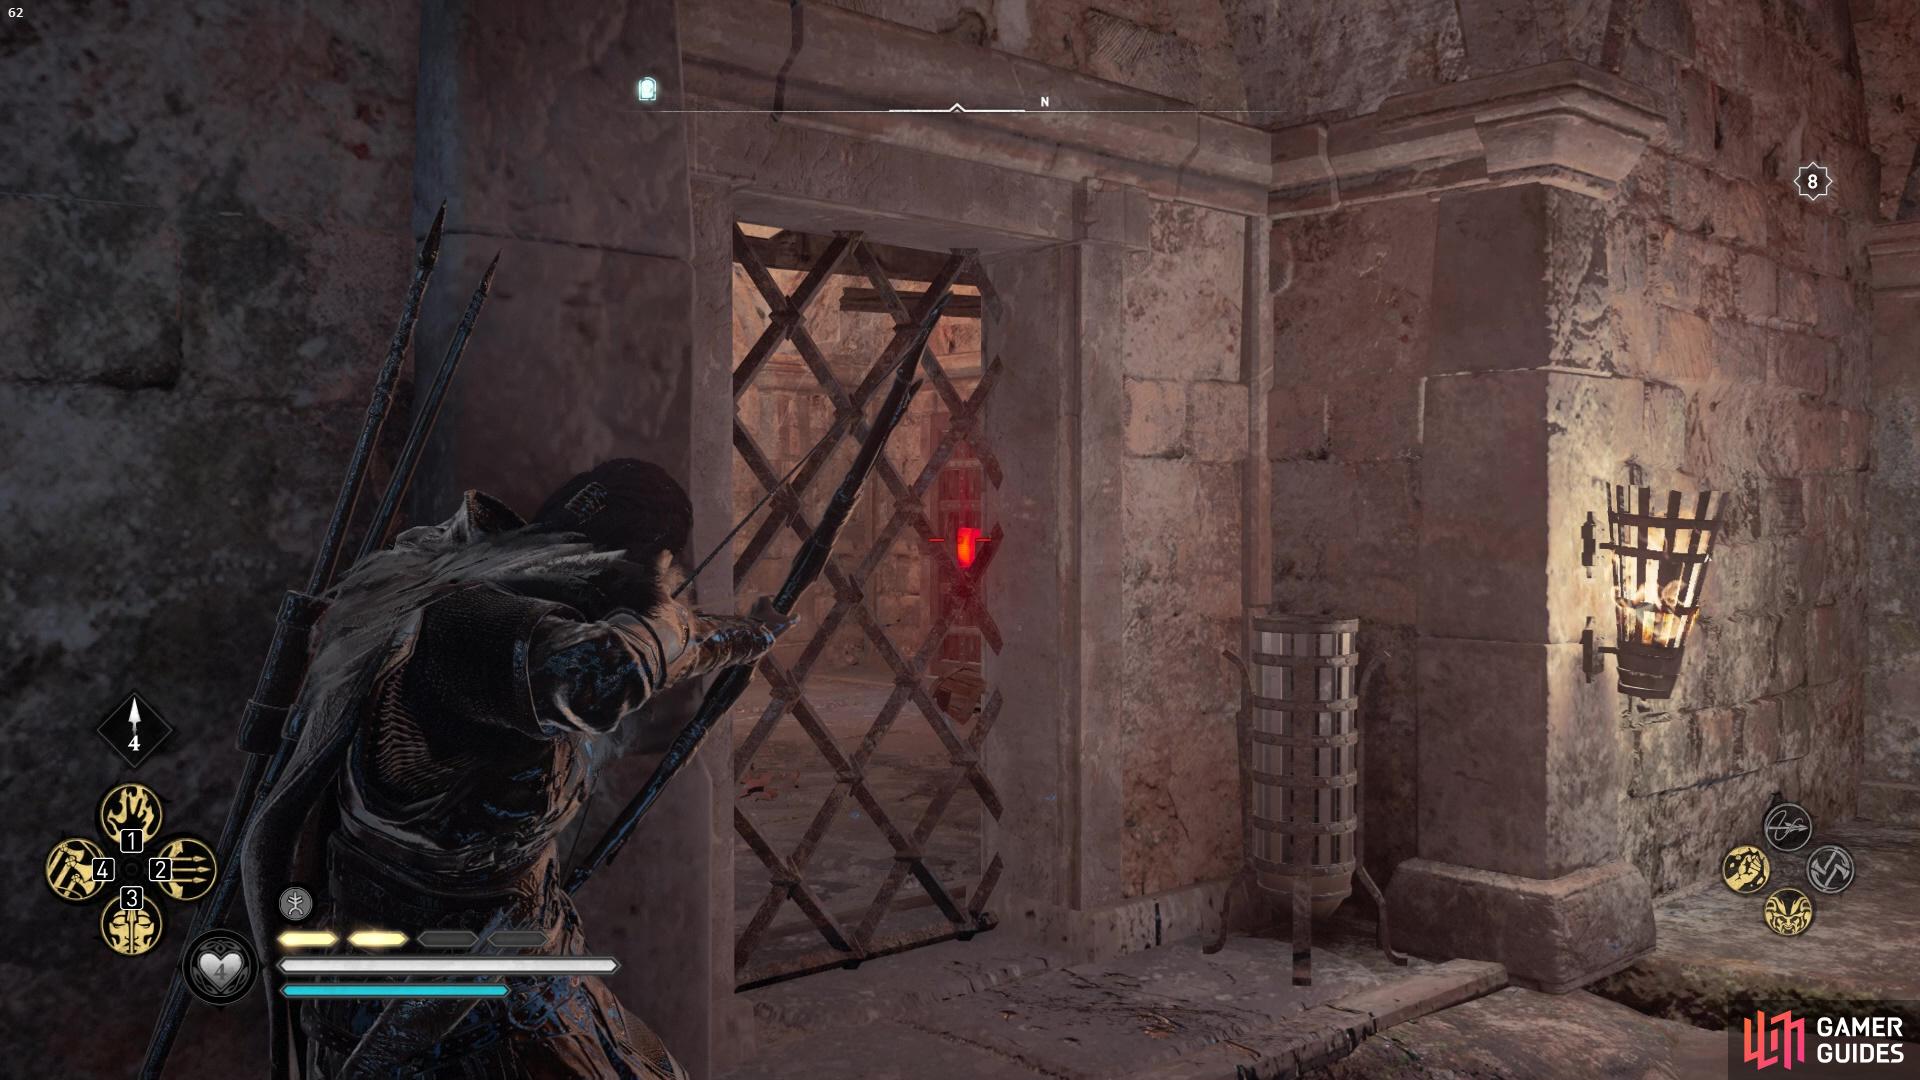 once you've exploded the stone barricade you'll be able to shoot the door lock through the bars.